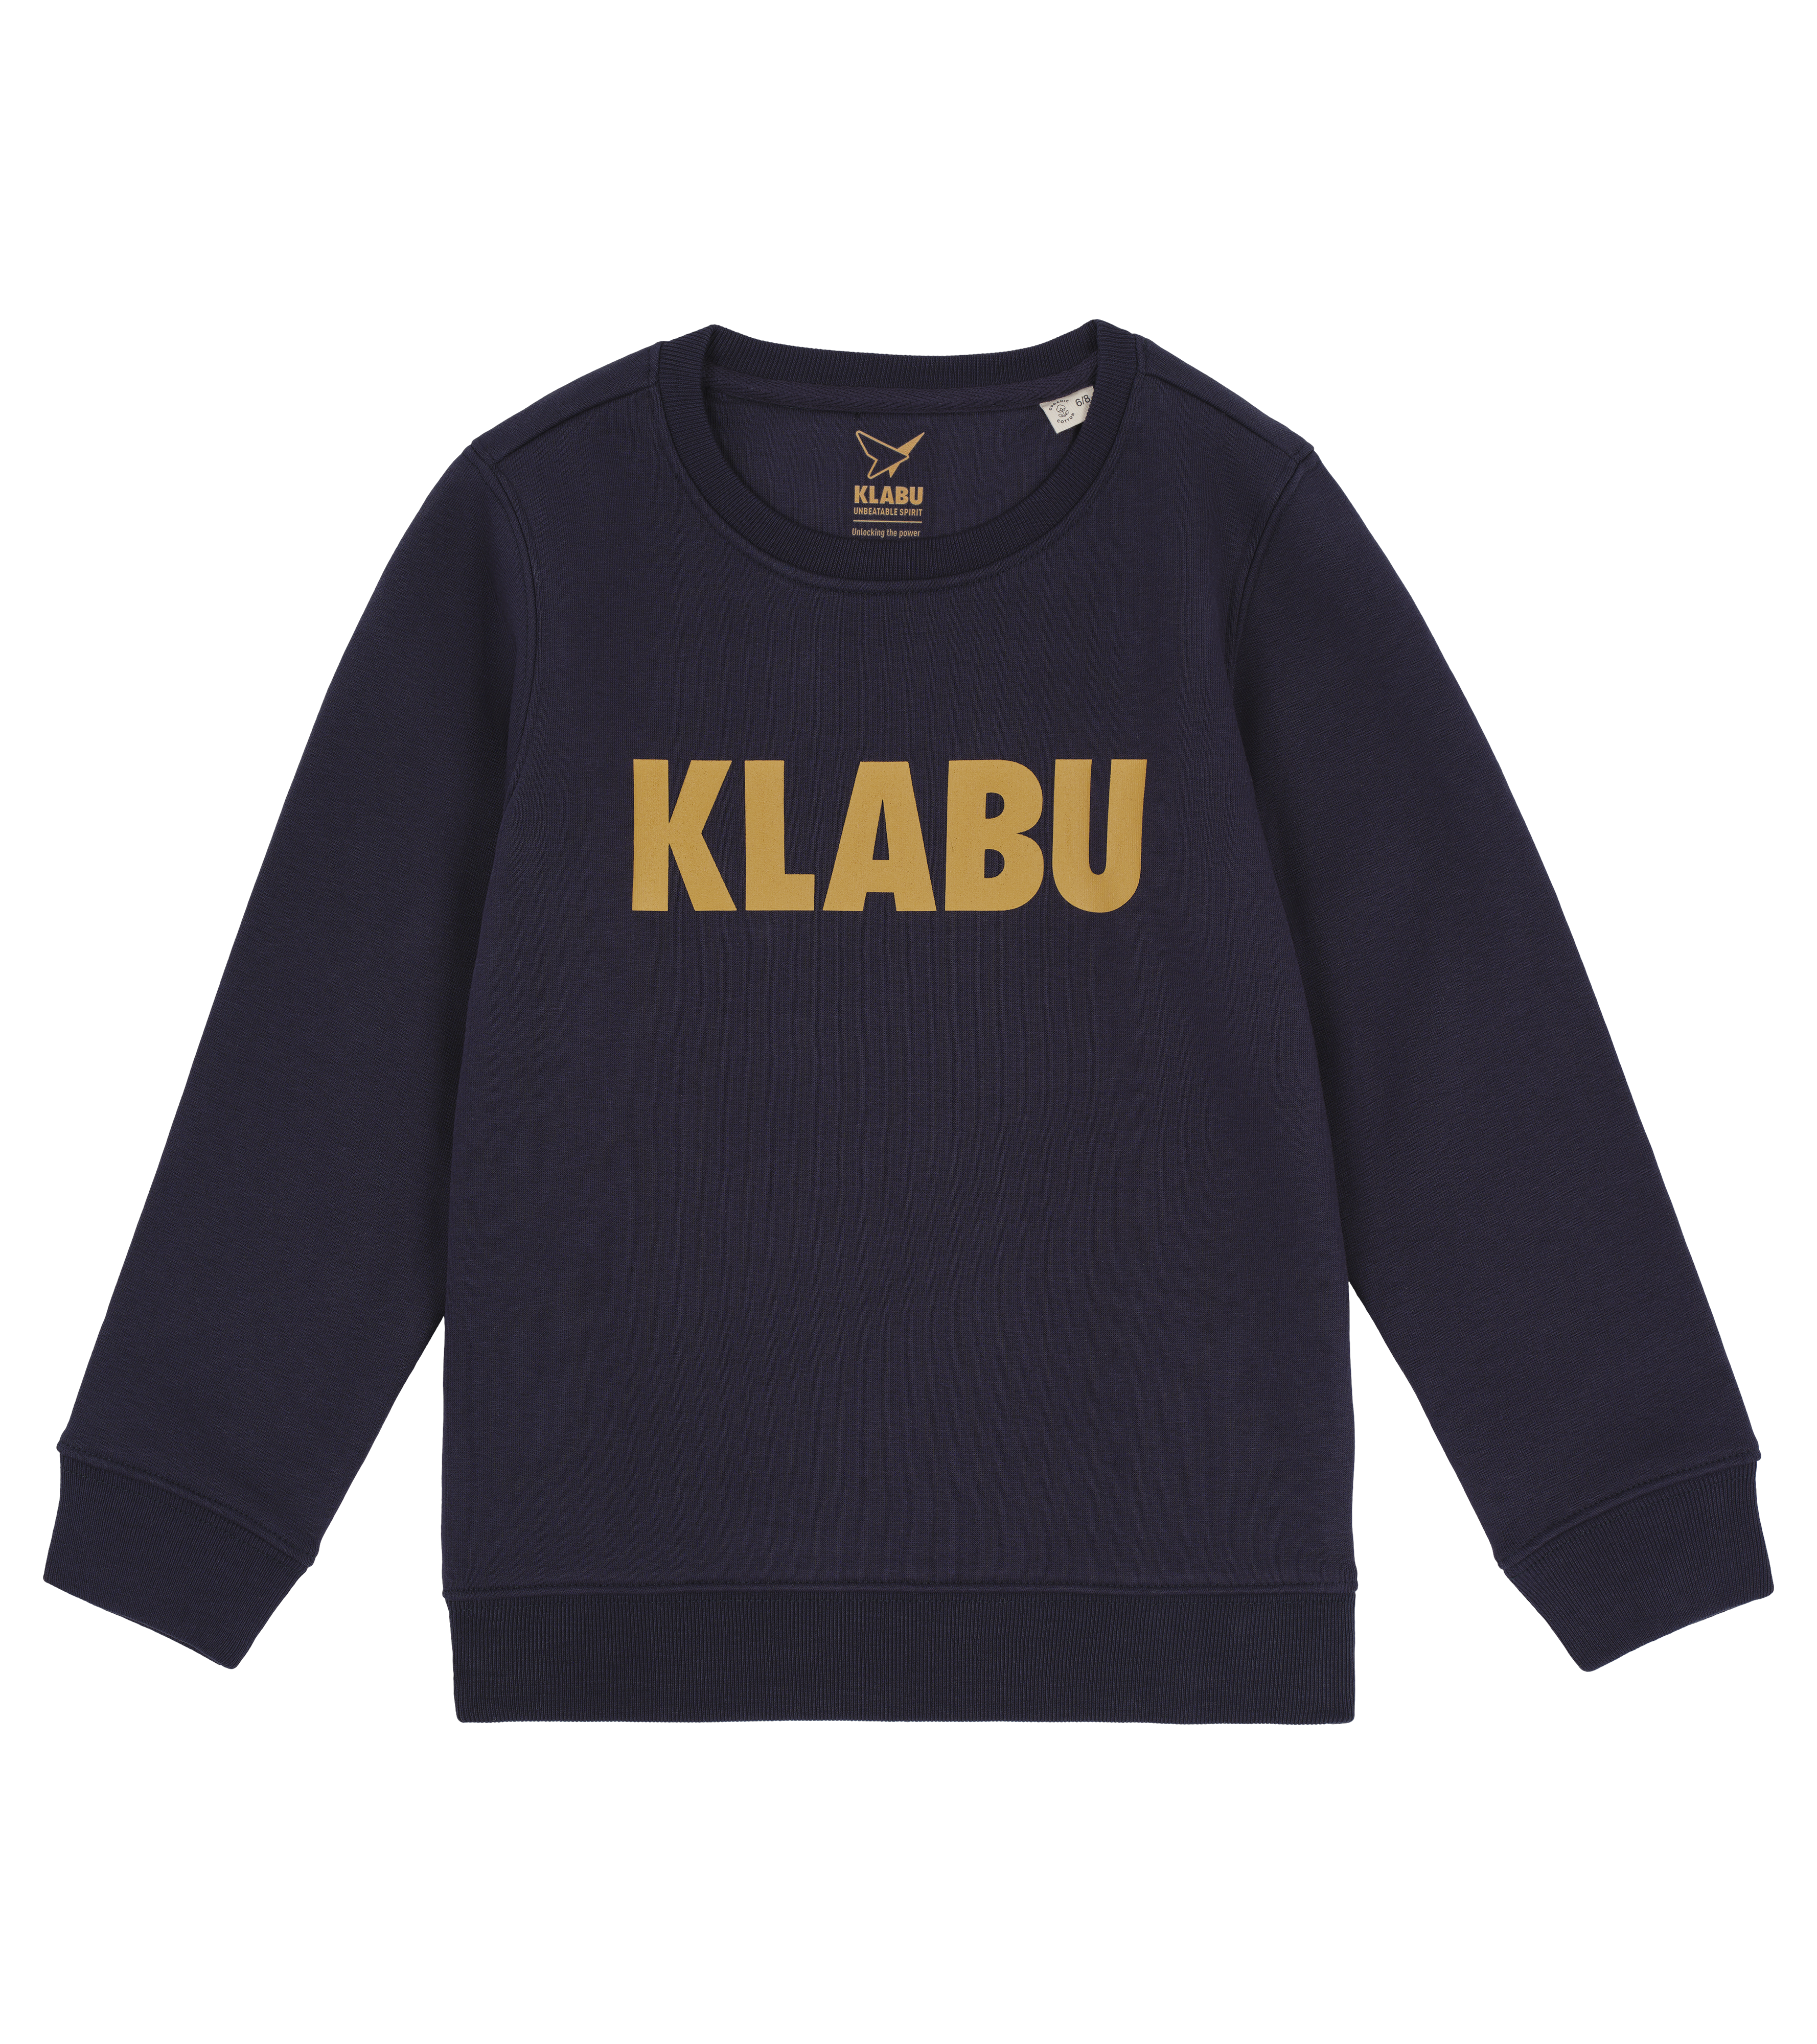 klabu navy sweater with gold graphic text